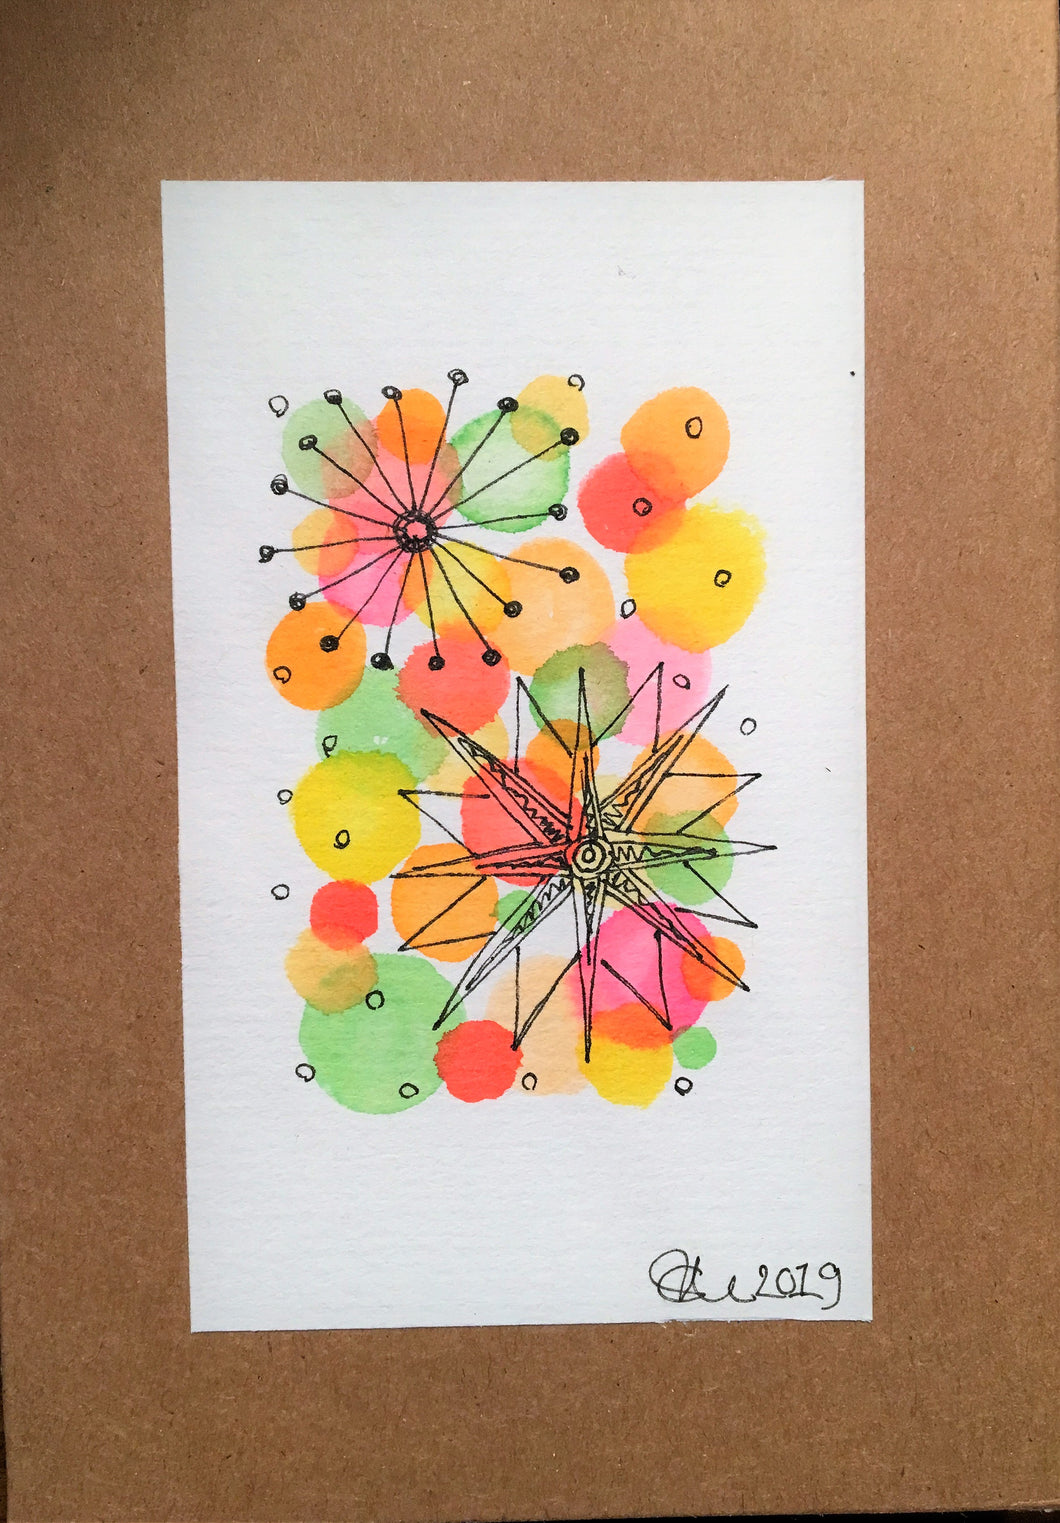 Handpainted Watercolour Greeting Card - Abstract Ink Star/Circle Design - Orange/Yellow/Green/Red - eDgE dEsiGn London